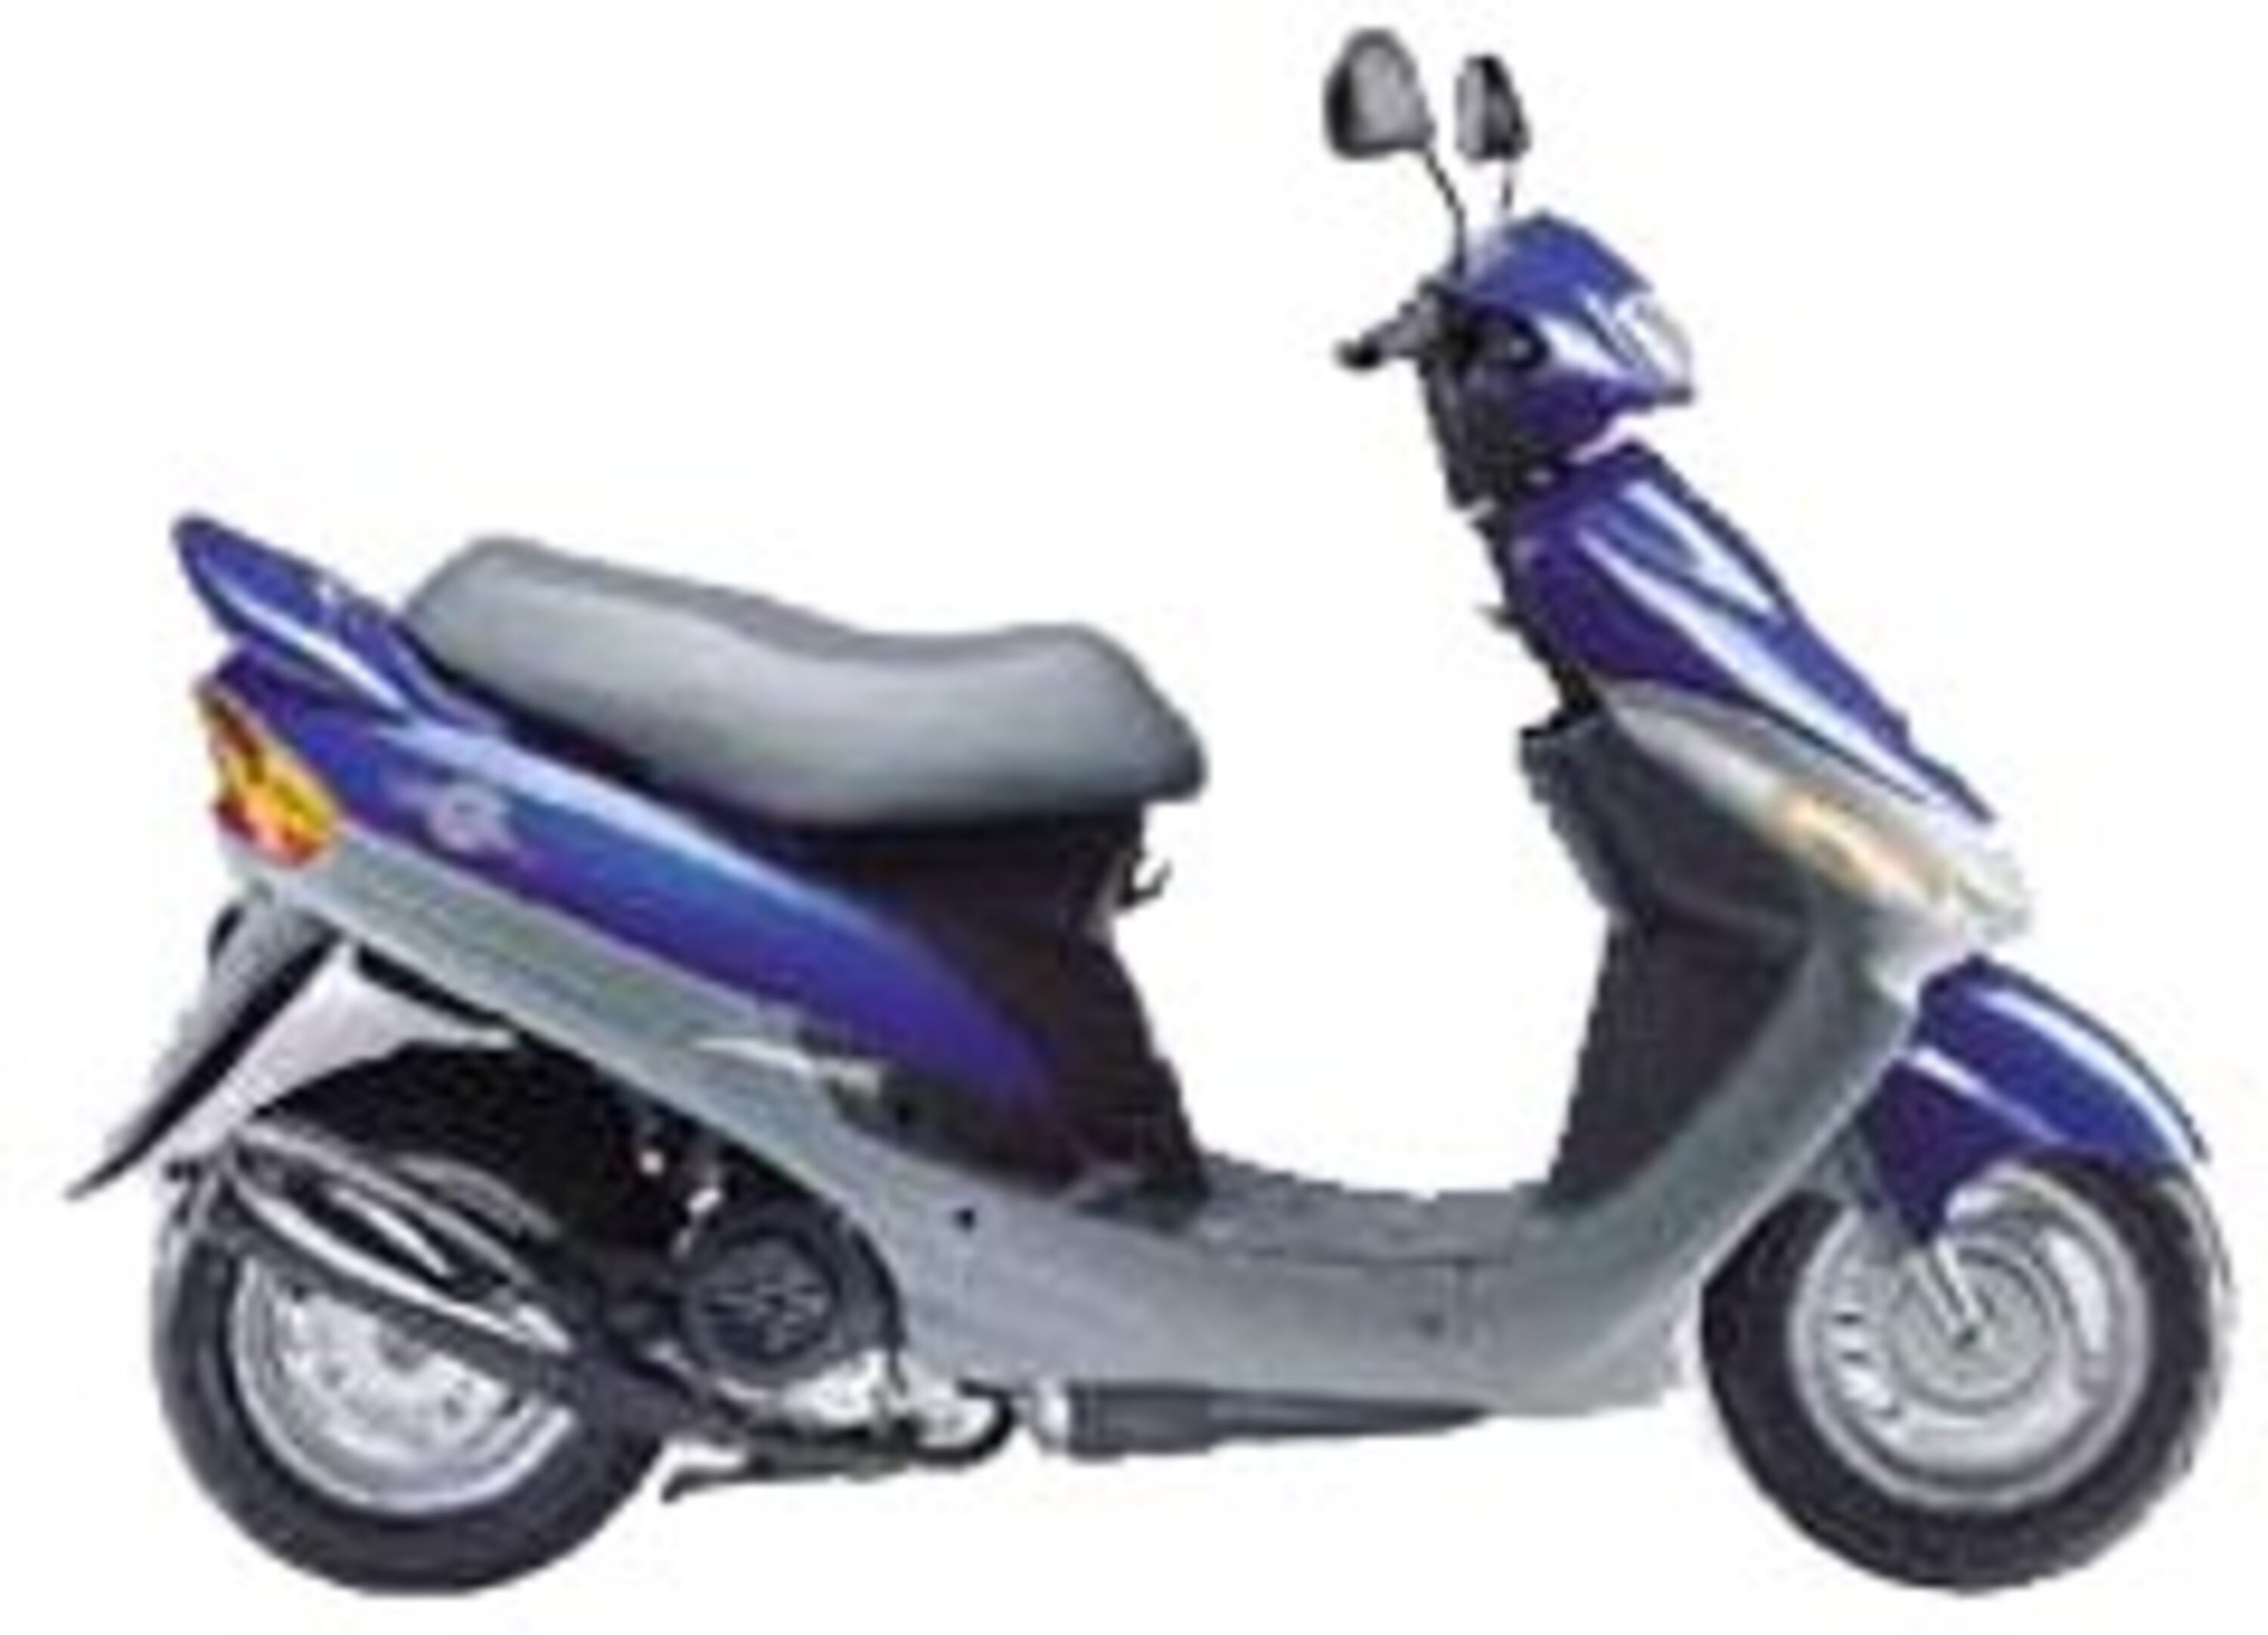 Kymco Filly 50 Filly 50 4T (1998 - 03)